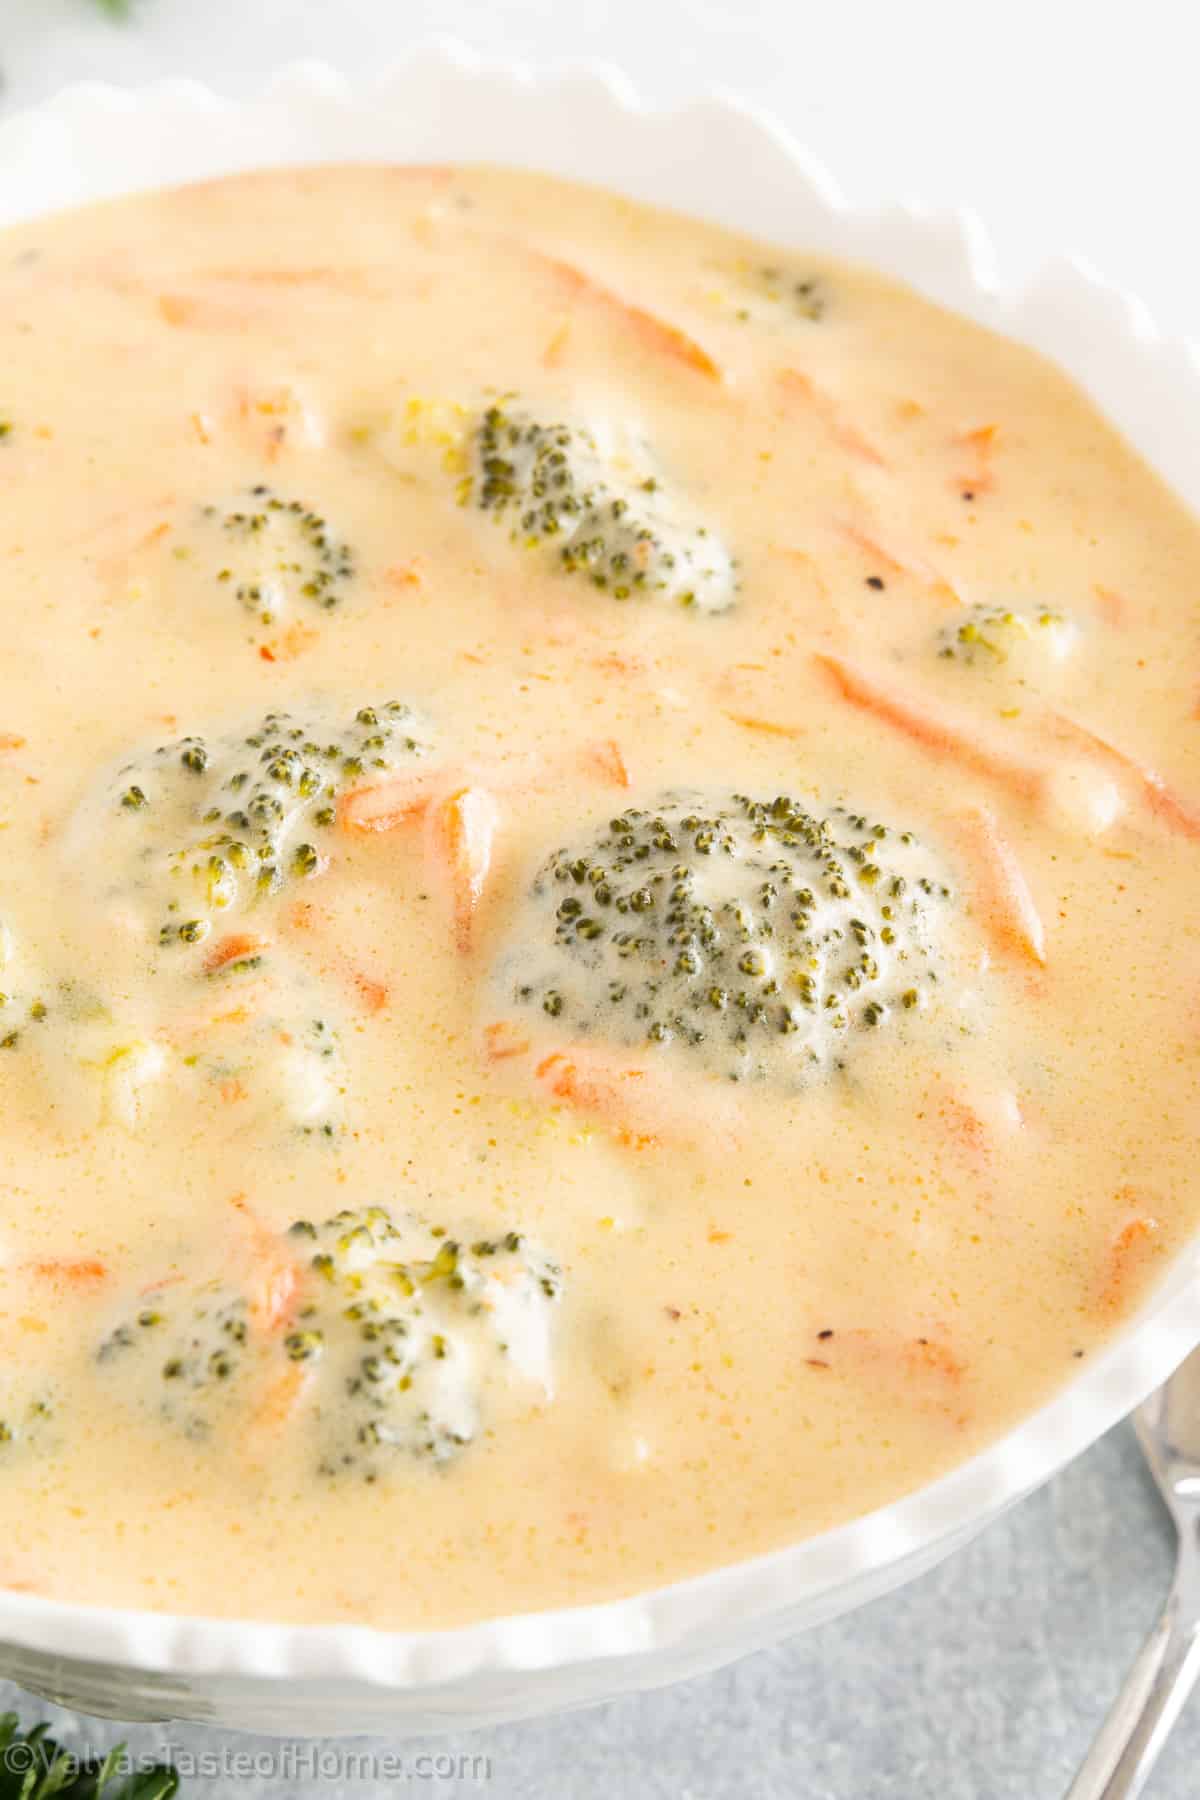 This Broccoli and Cheddar Soup combines the delicious flavors of tender broccoli in a creamy soup that has the perfect silky texture and includes cheddar cheese to just the right level! 